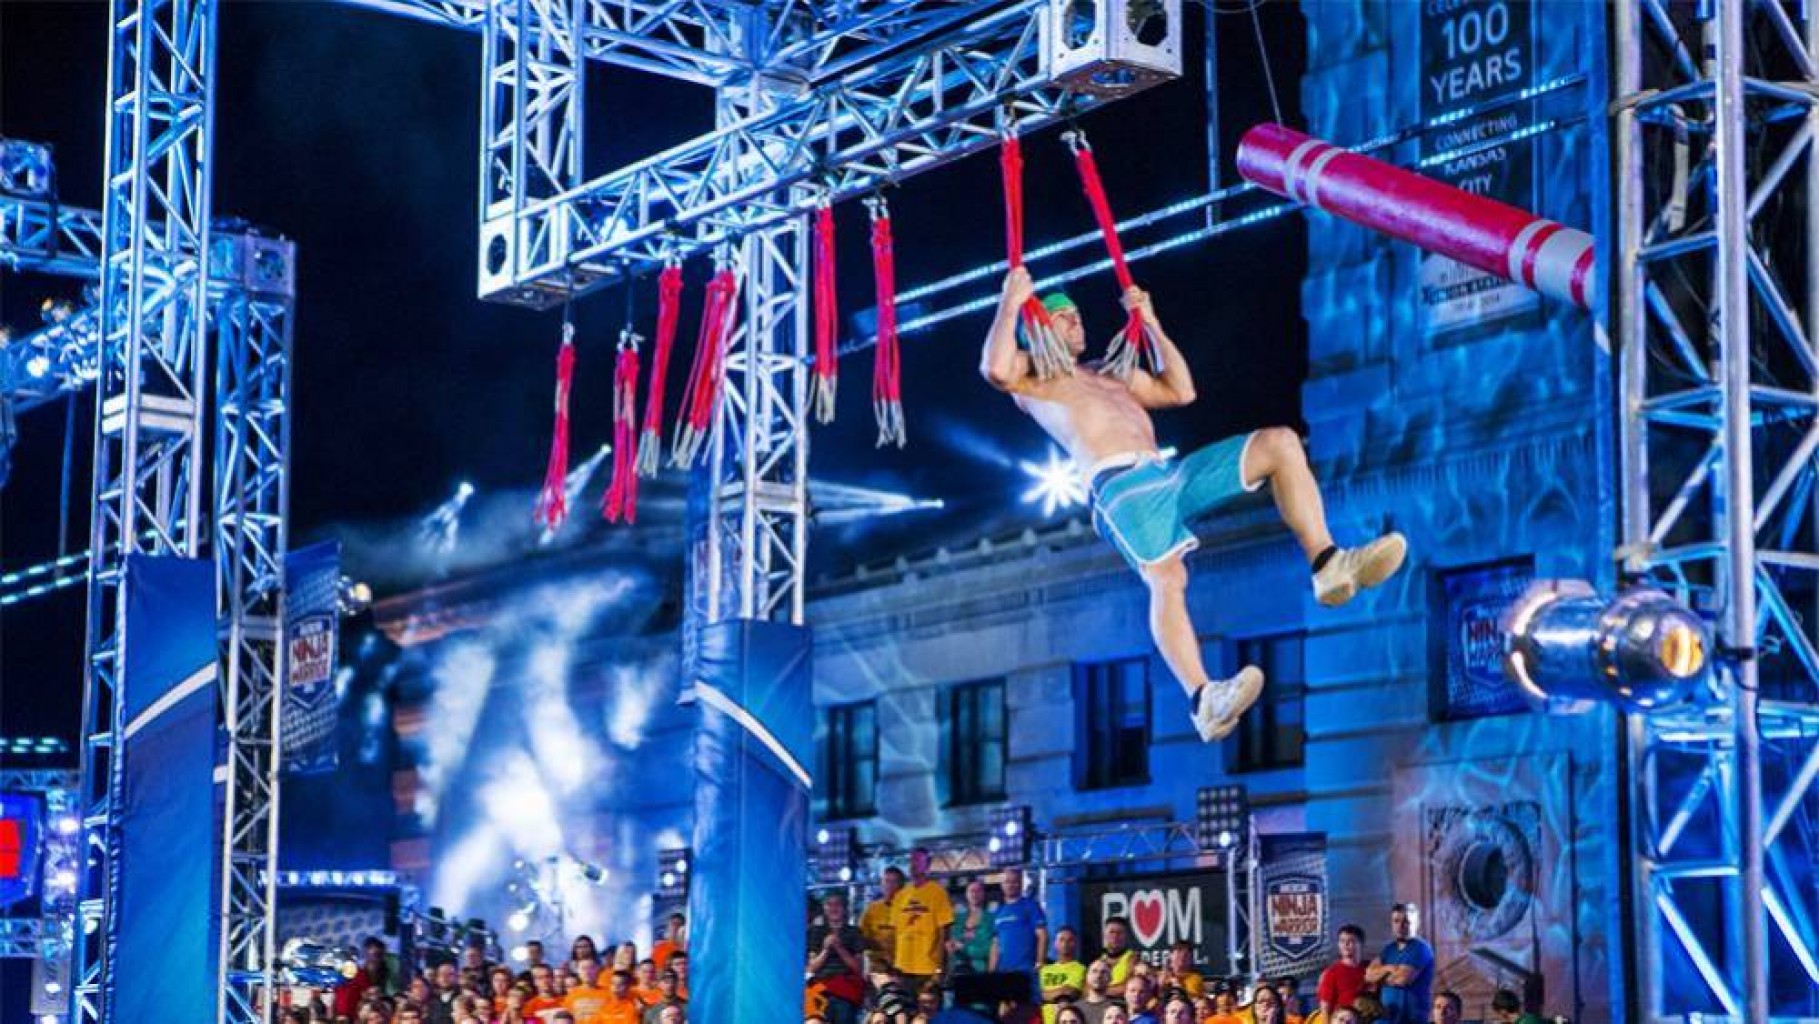 AMERICAN  NINJA WARRIOR TAPING ANNOUNCED FOR STATE CAPITOL